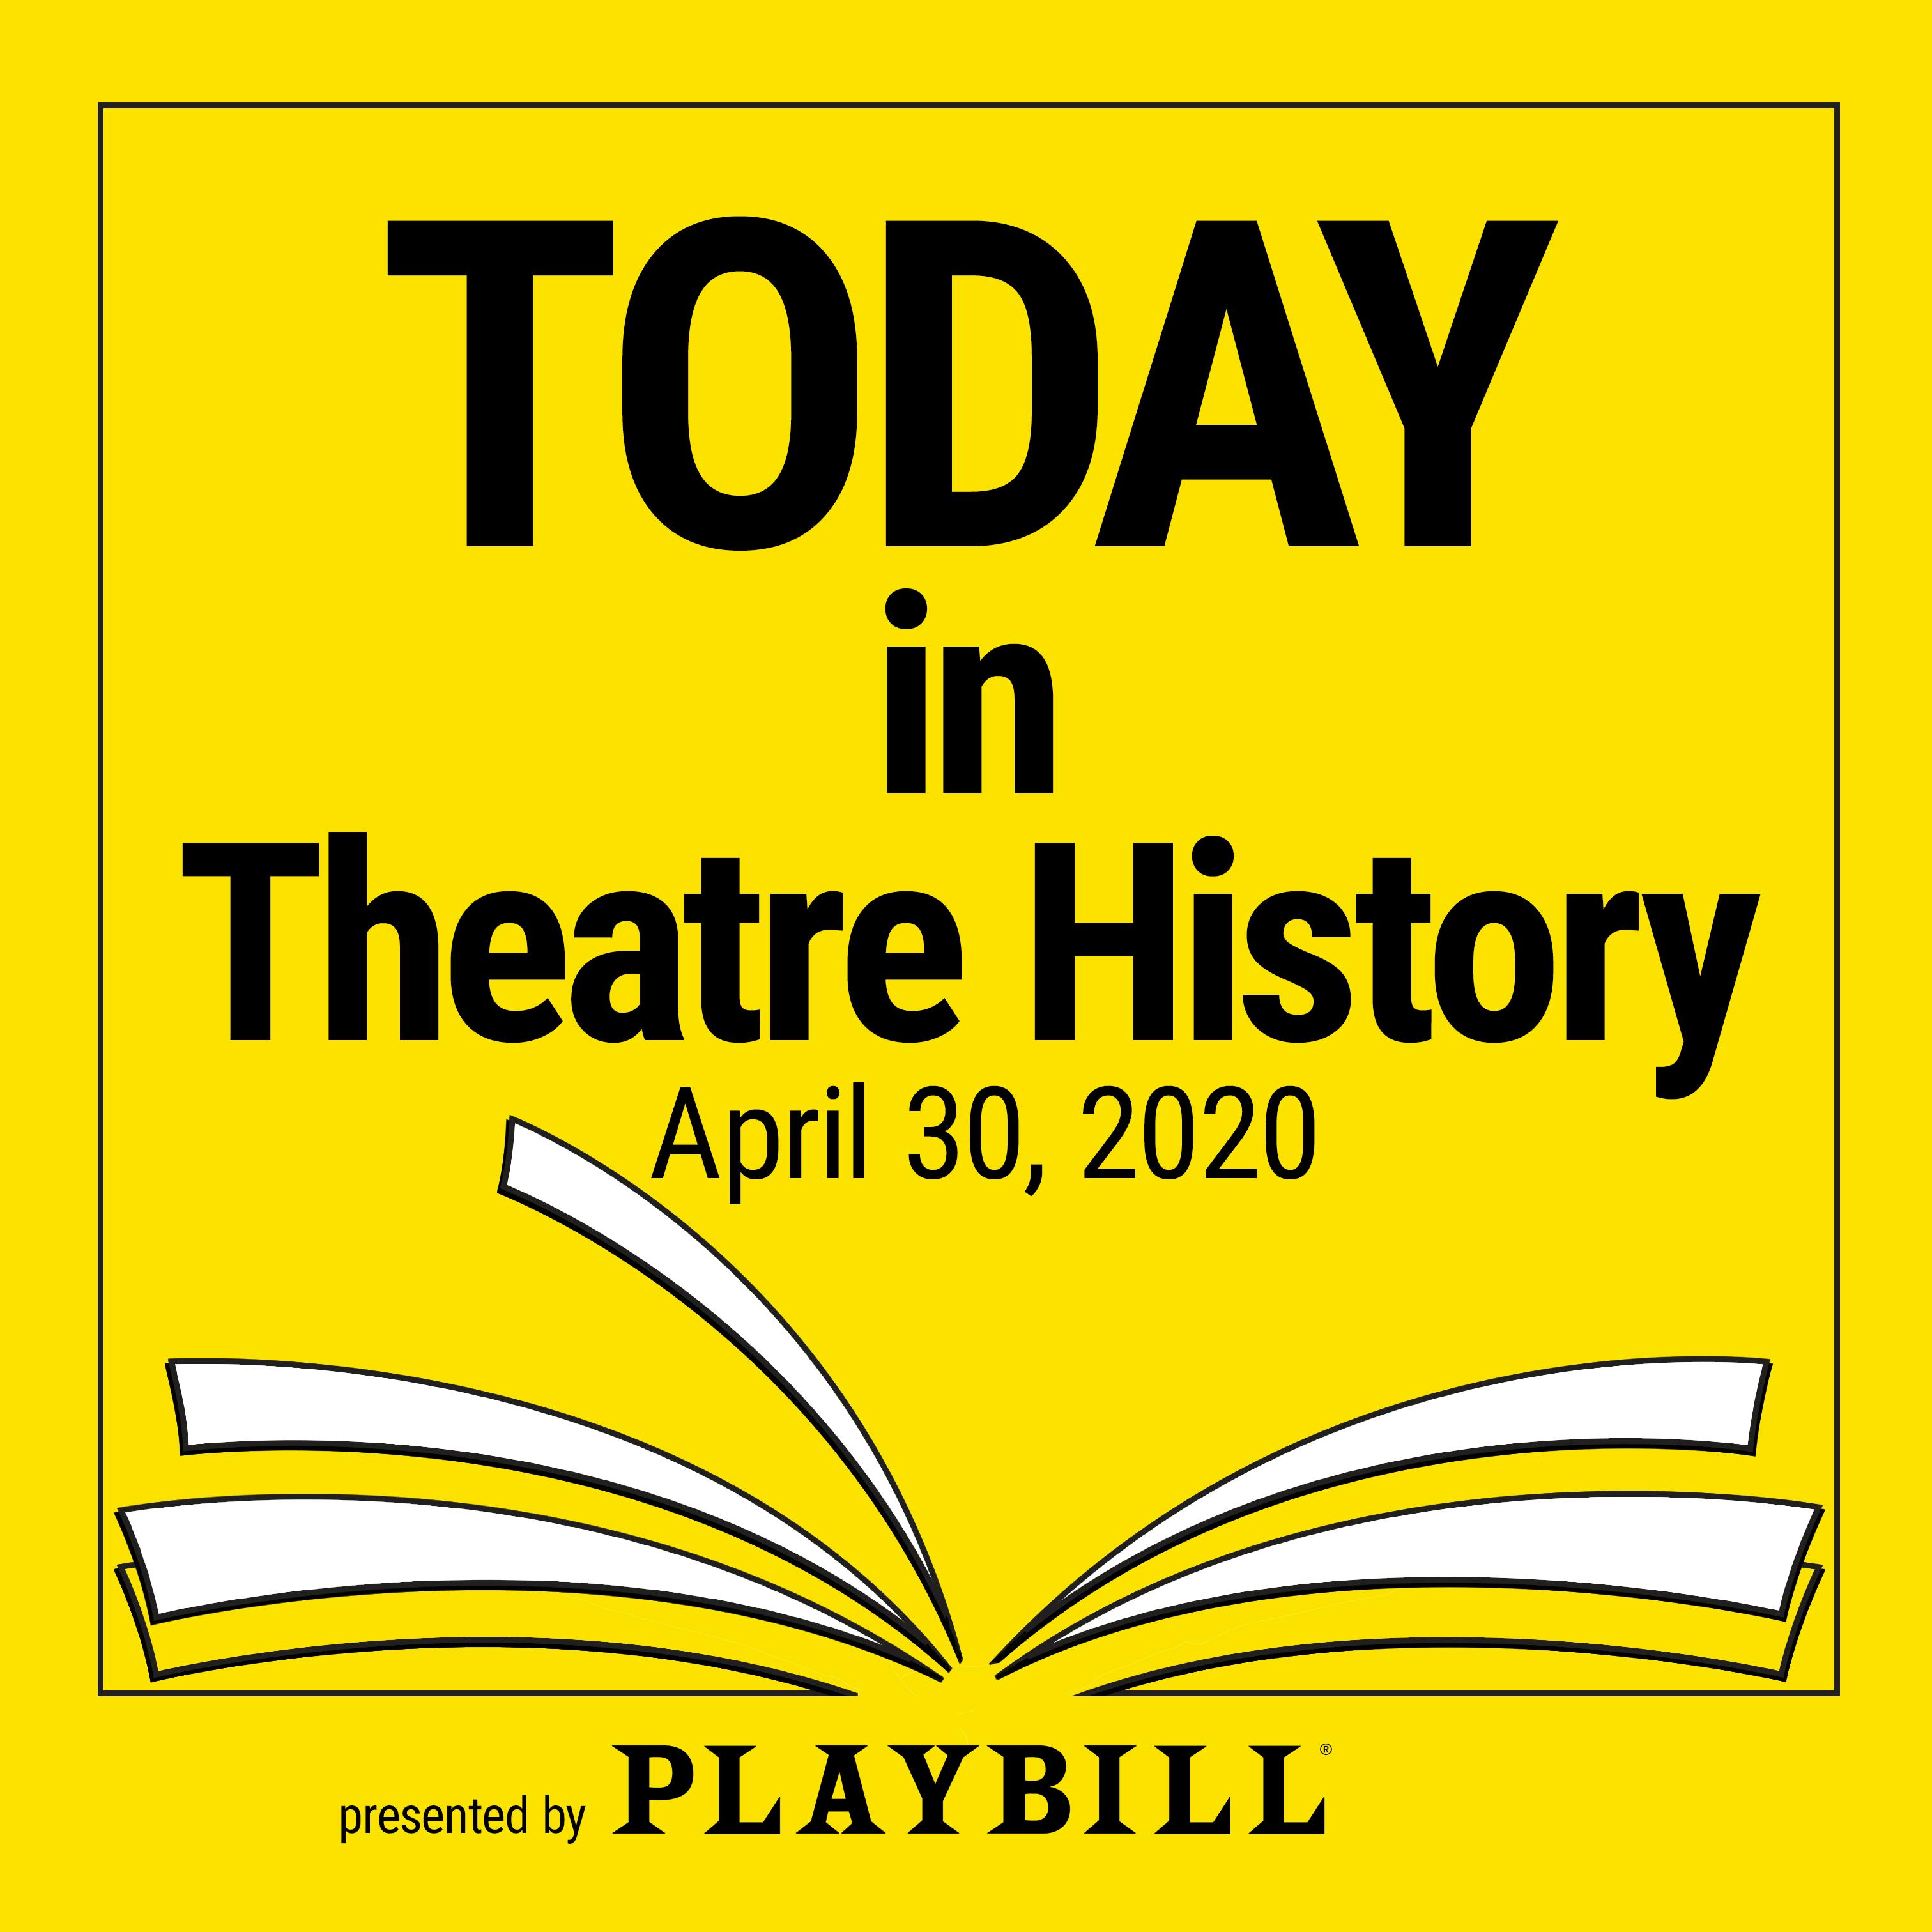 April 30, 2020: Broadway got a splash of Skinny & Sweet when 9 to 5 opened, and more!